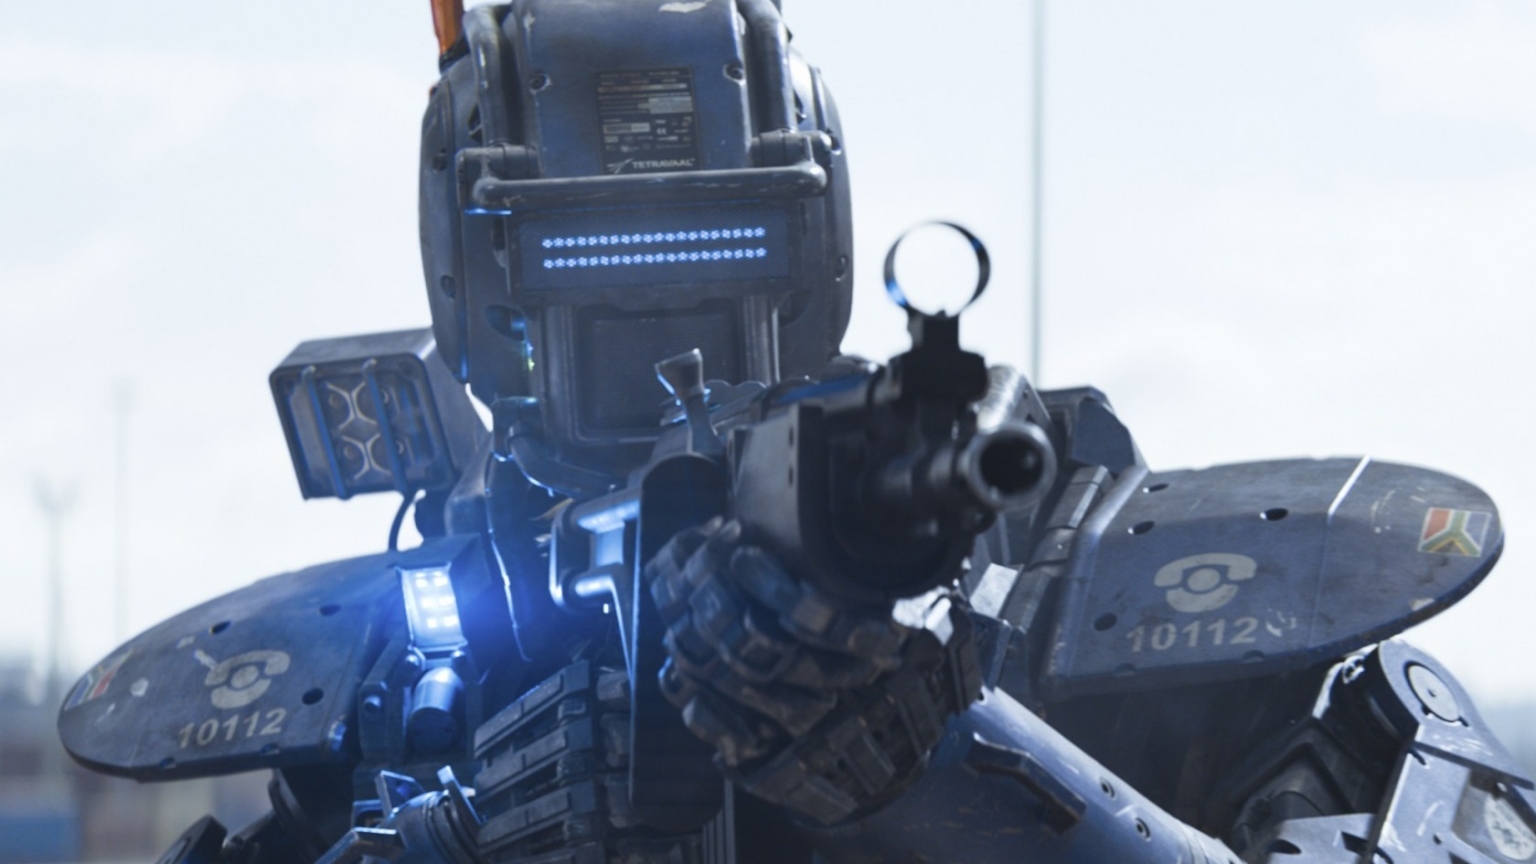 Chappie for 1536 x 864 HDTV resolution